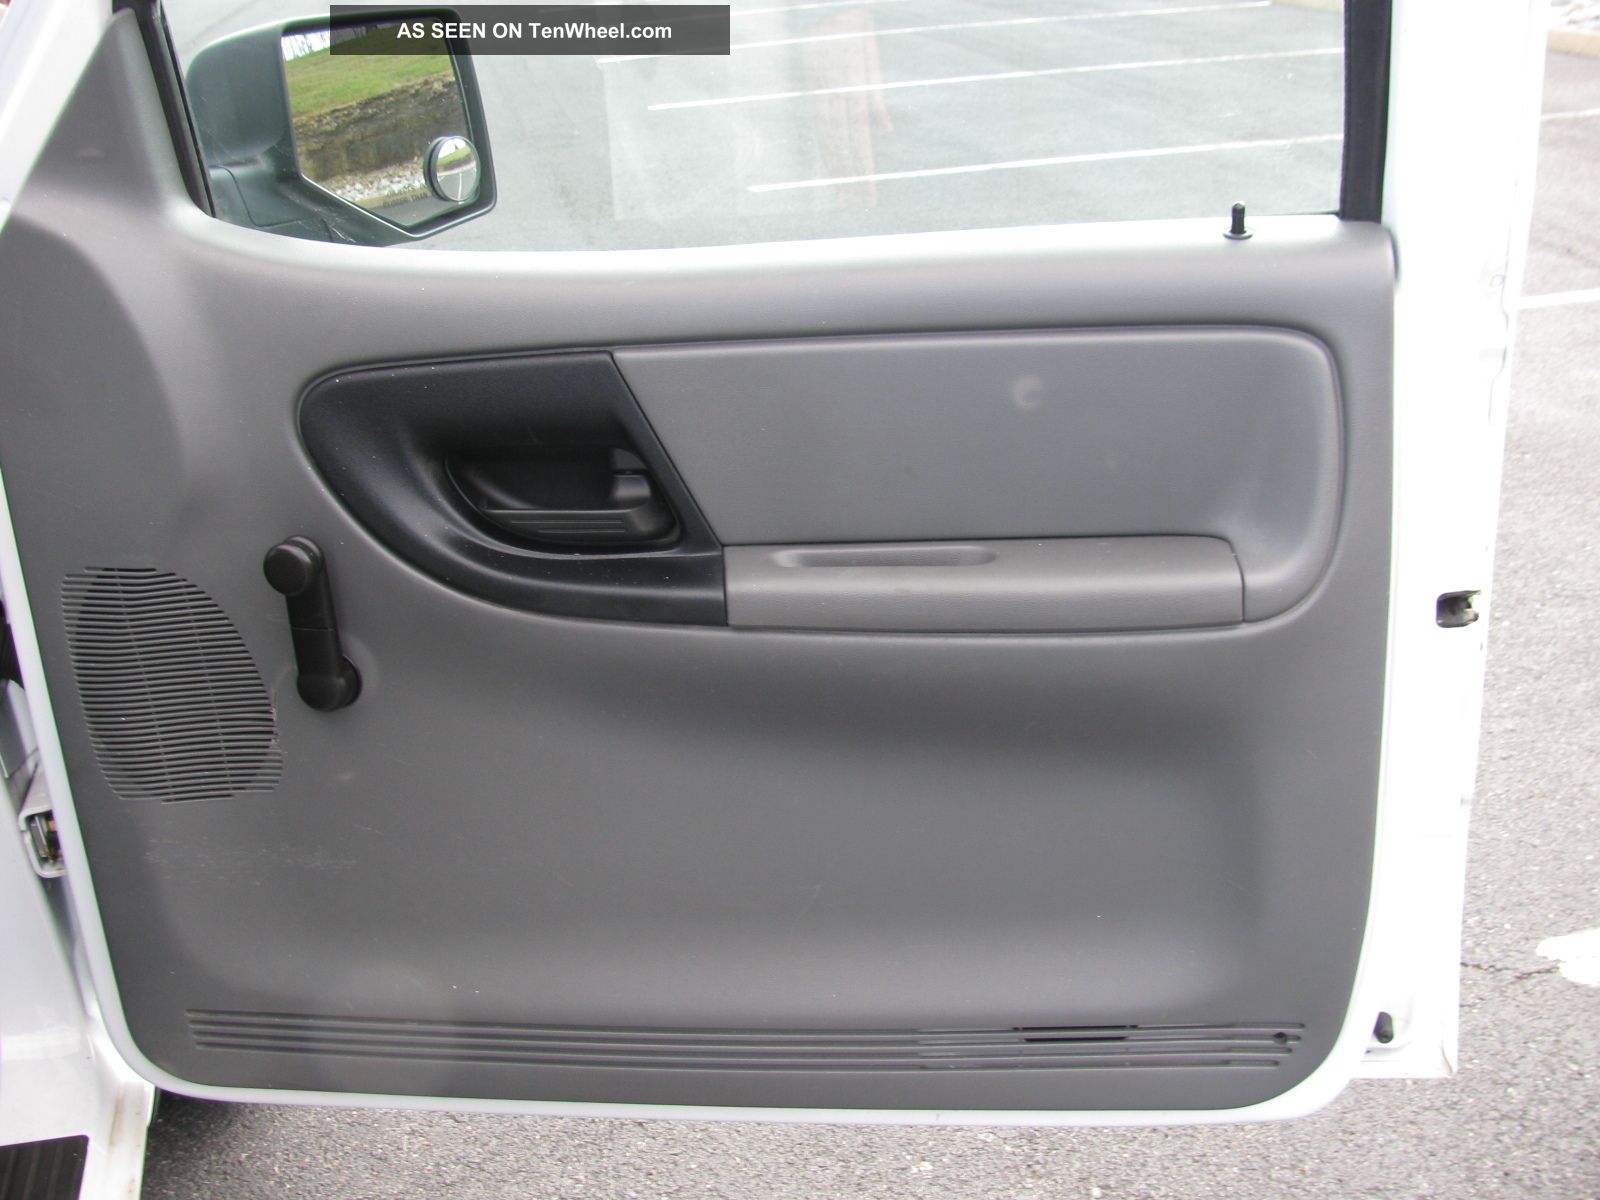 2010 Ford ranger tool boxes #2